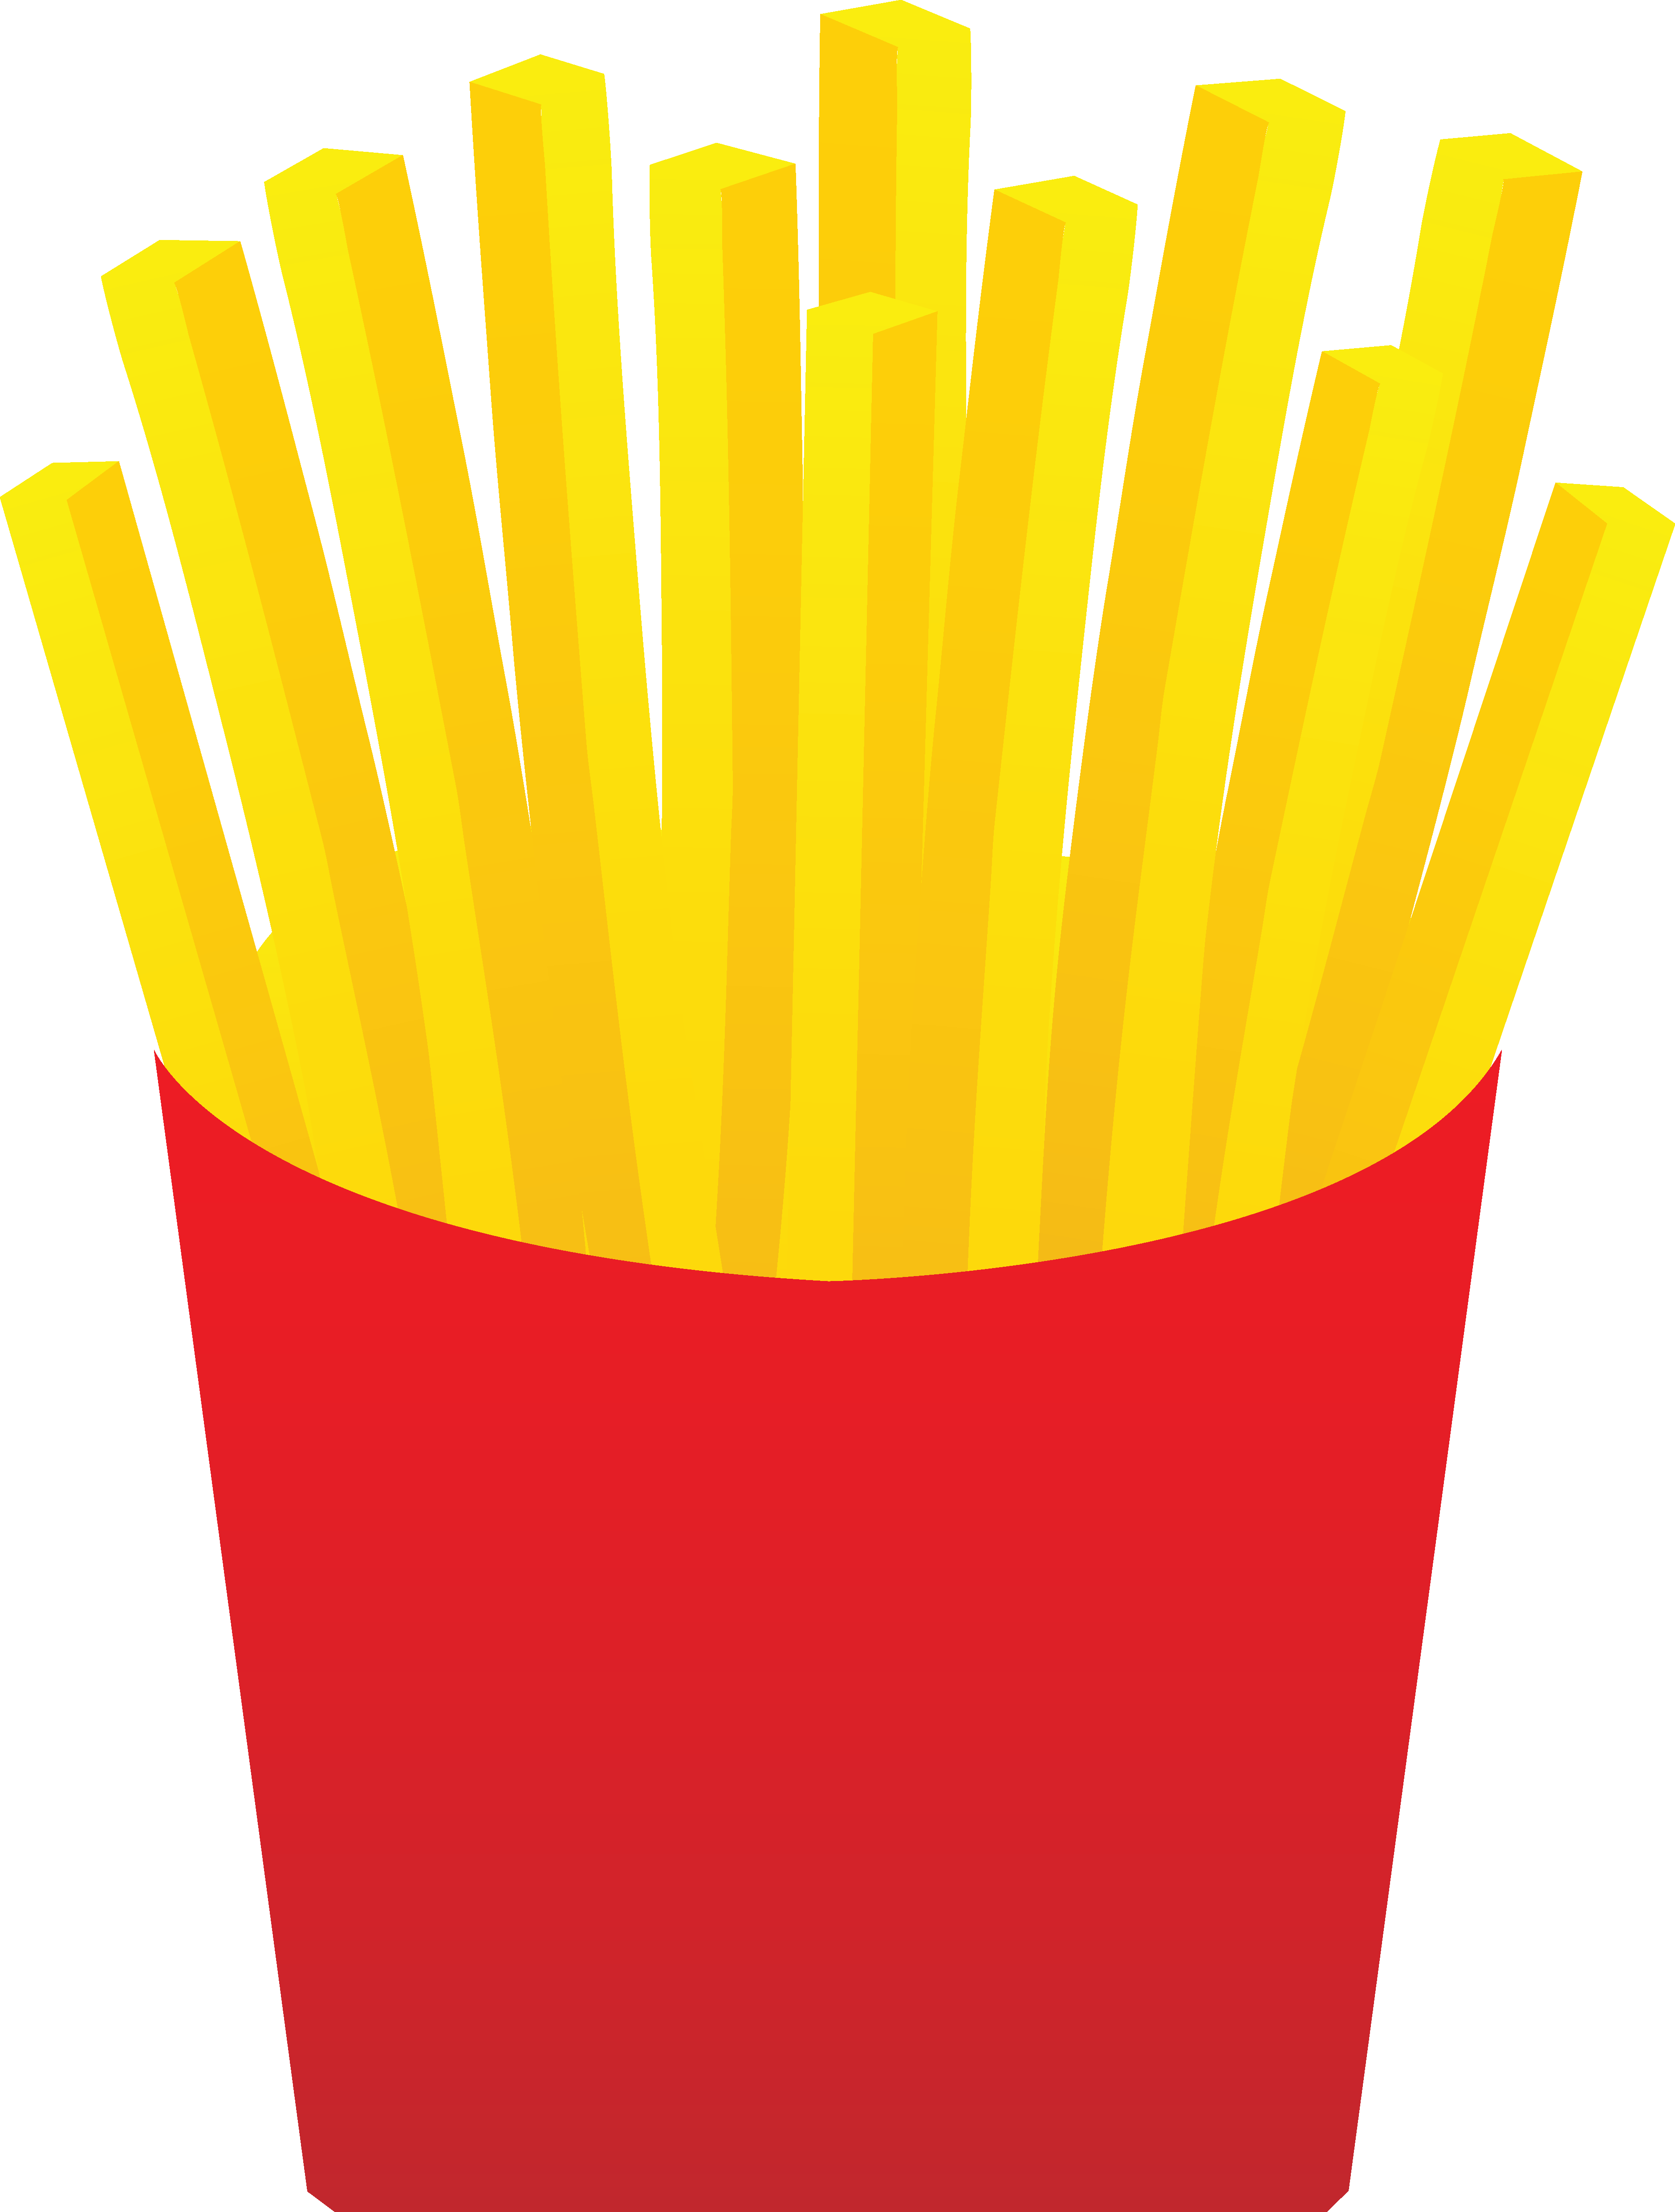 Mcdonalds French Fries Clip A